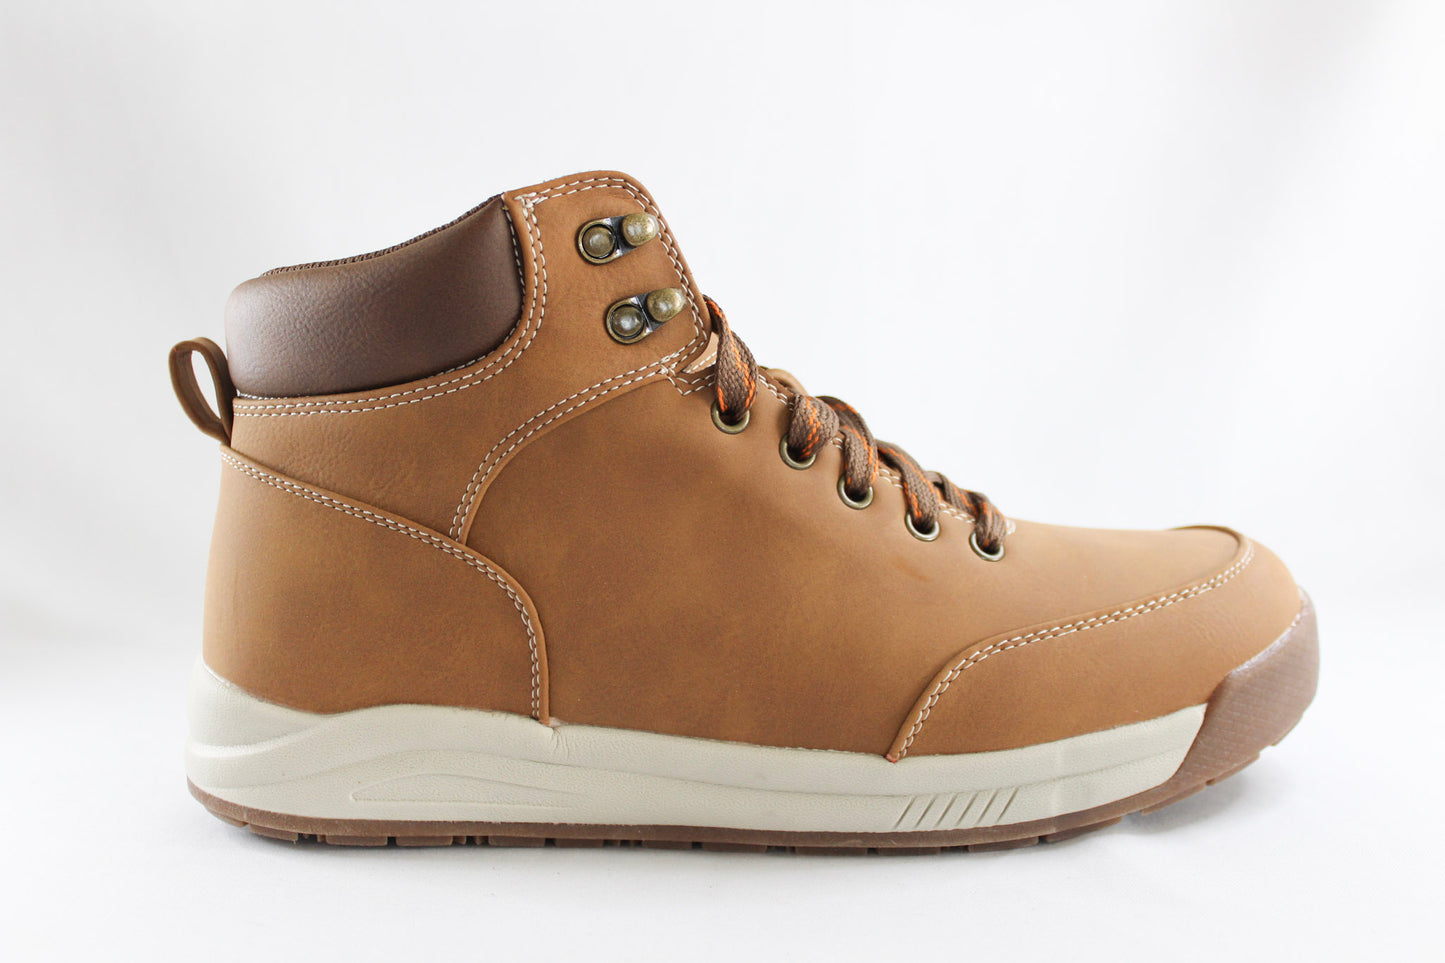 Men's Goodfellow & Co Anders Hiking Boots